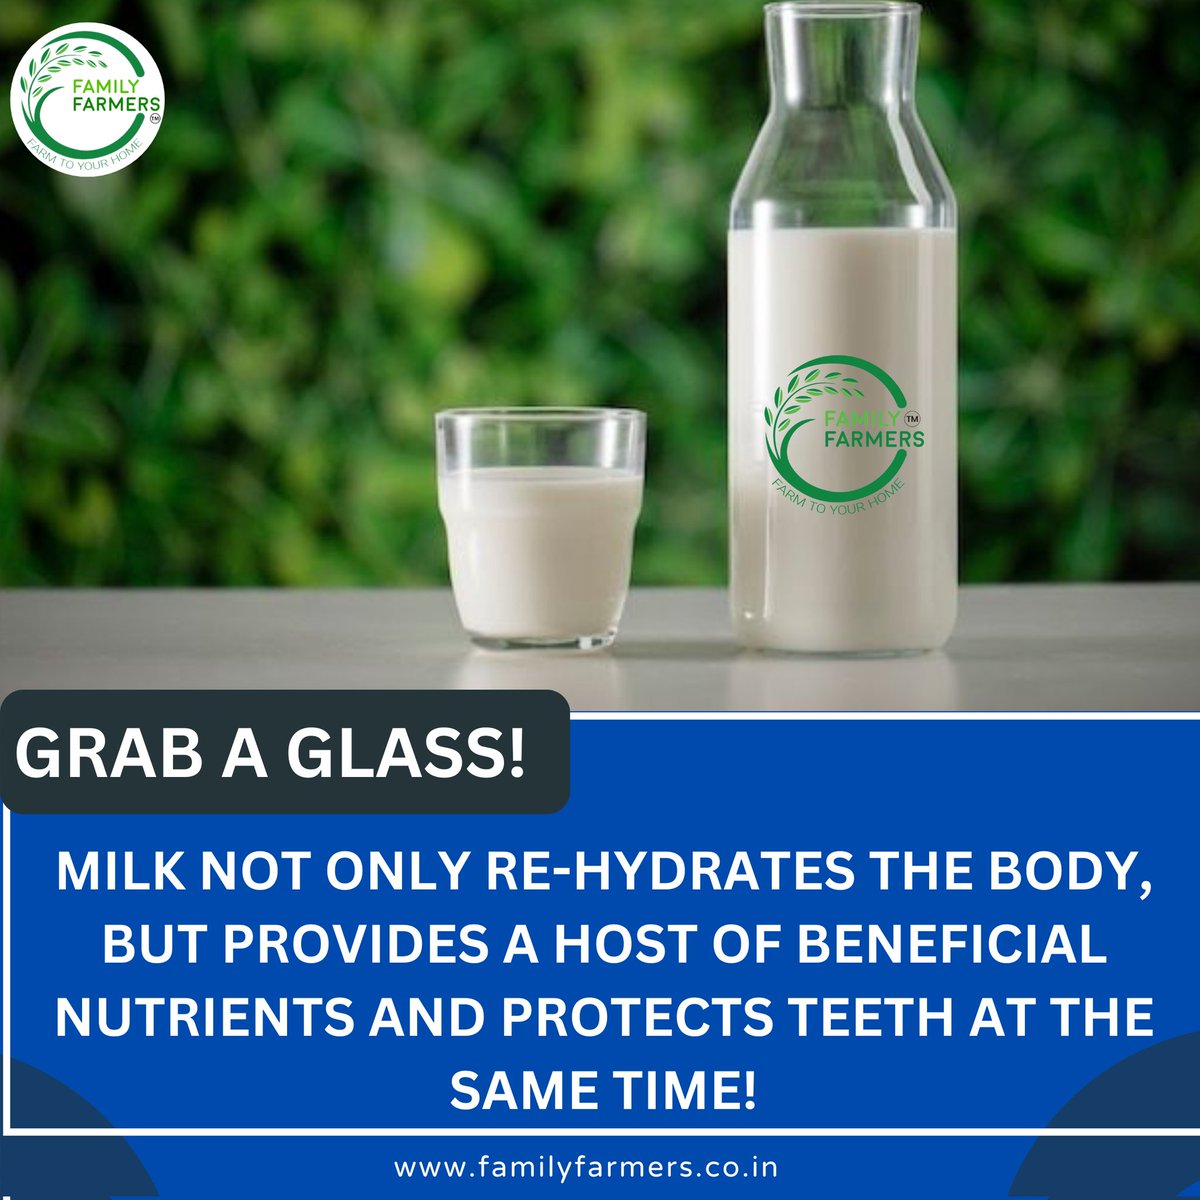 Milk facts of the day.
. 
. #didyouknowfacts #didyouknow  #facts #factsaboutmilk #factsofmilk #dailyfacts